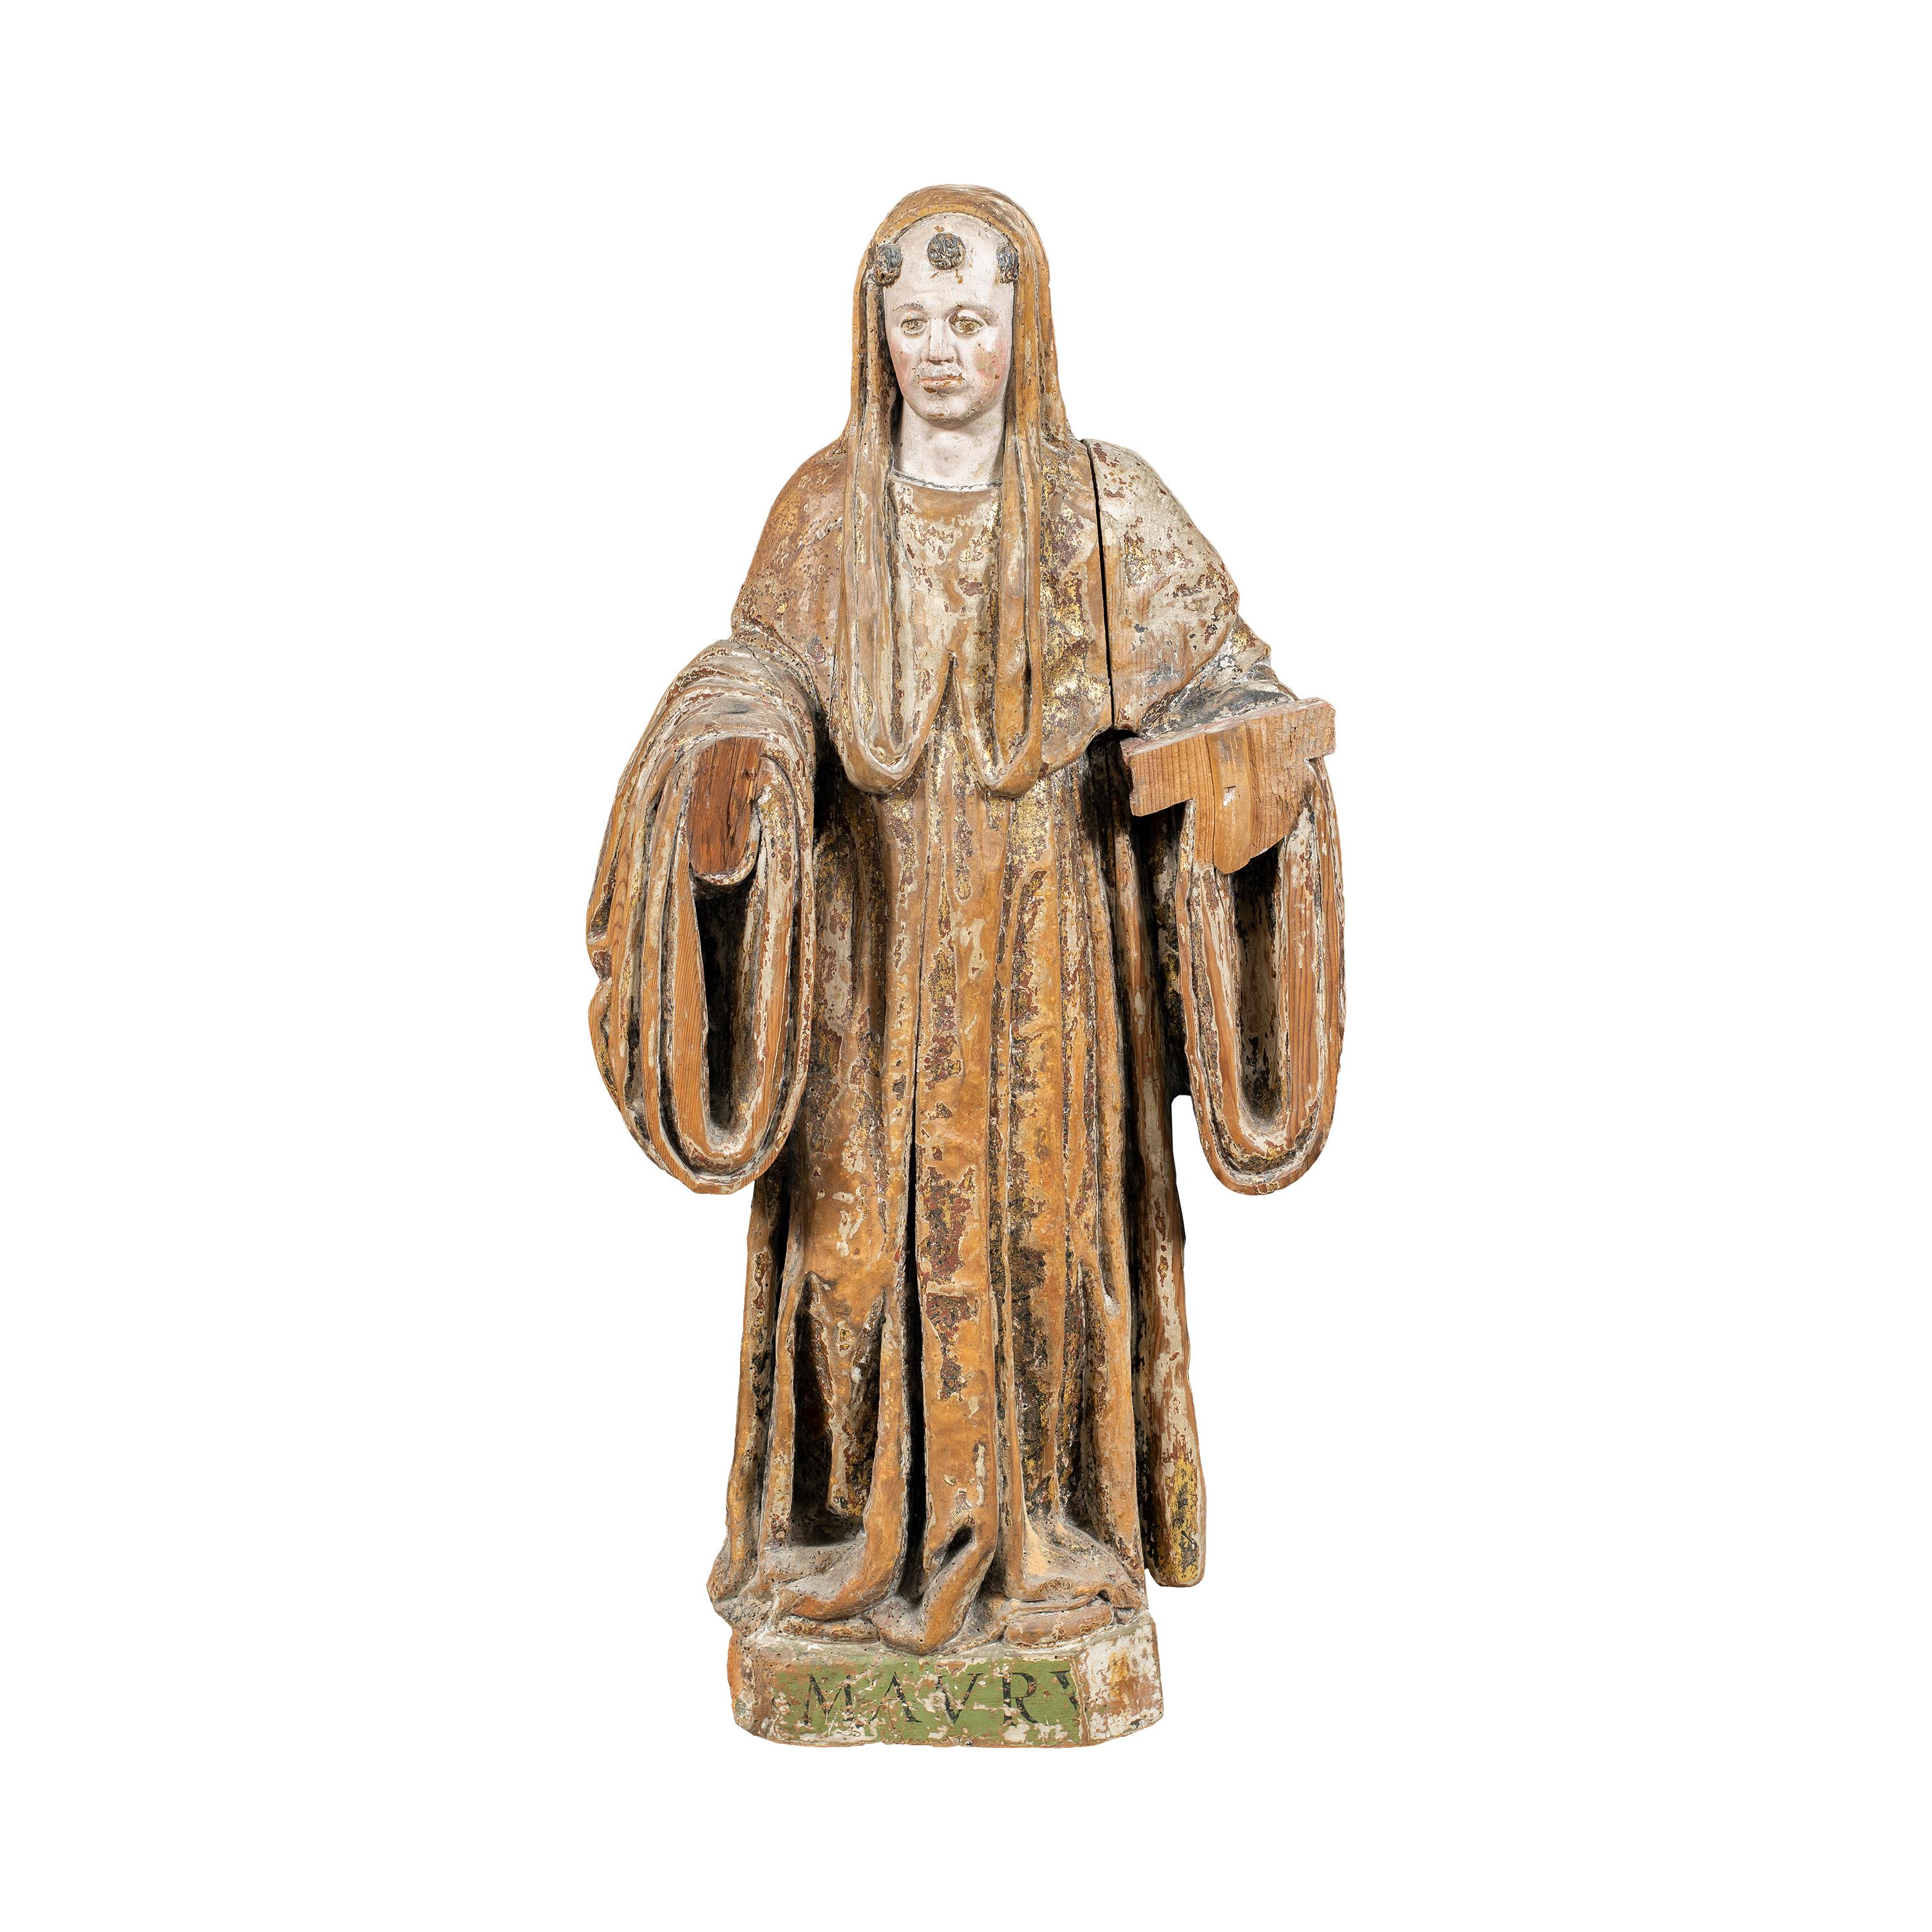 Unknown Figurative Sculpture - 16th century Italian carved wood sculpture - Saint Mauritius - Gilded Painted